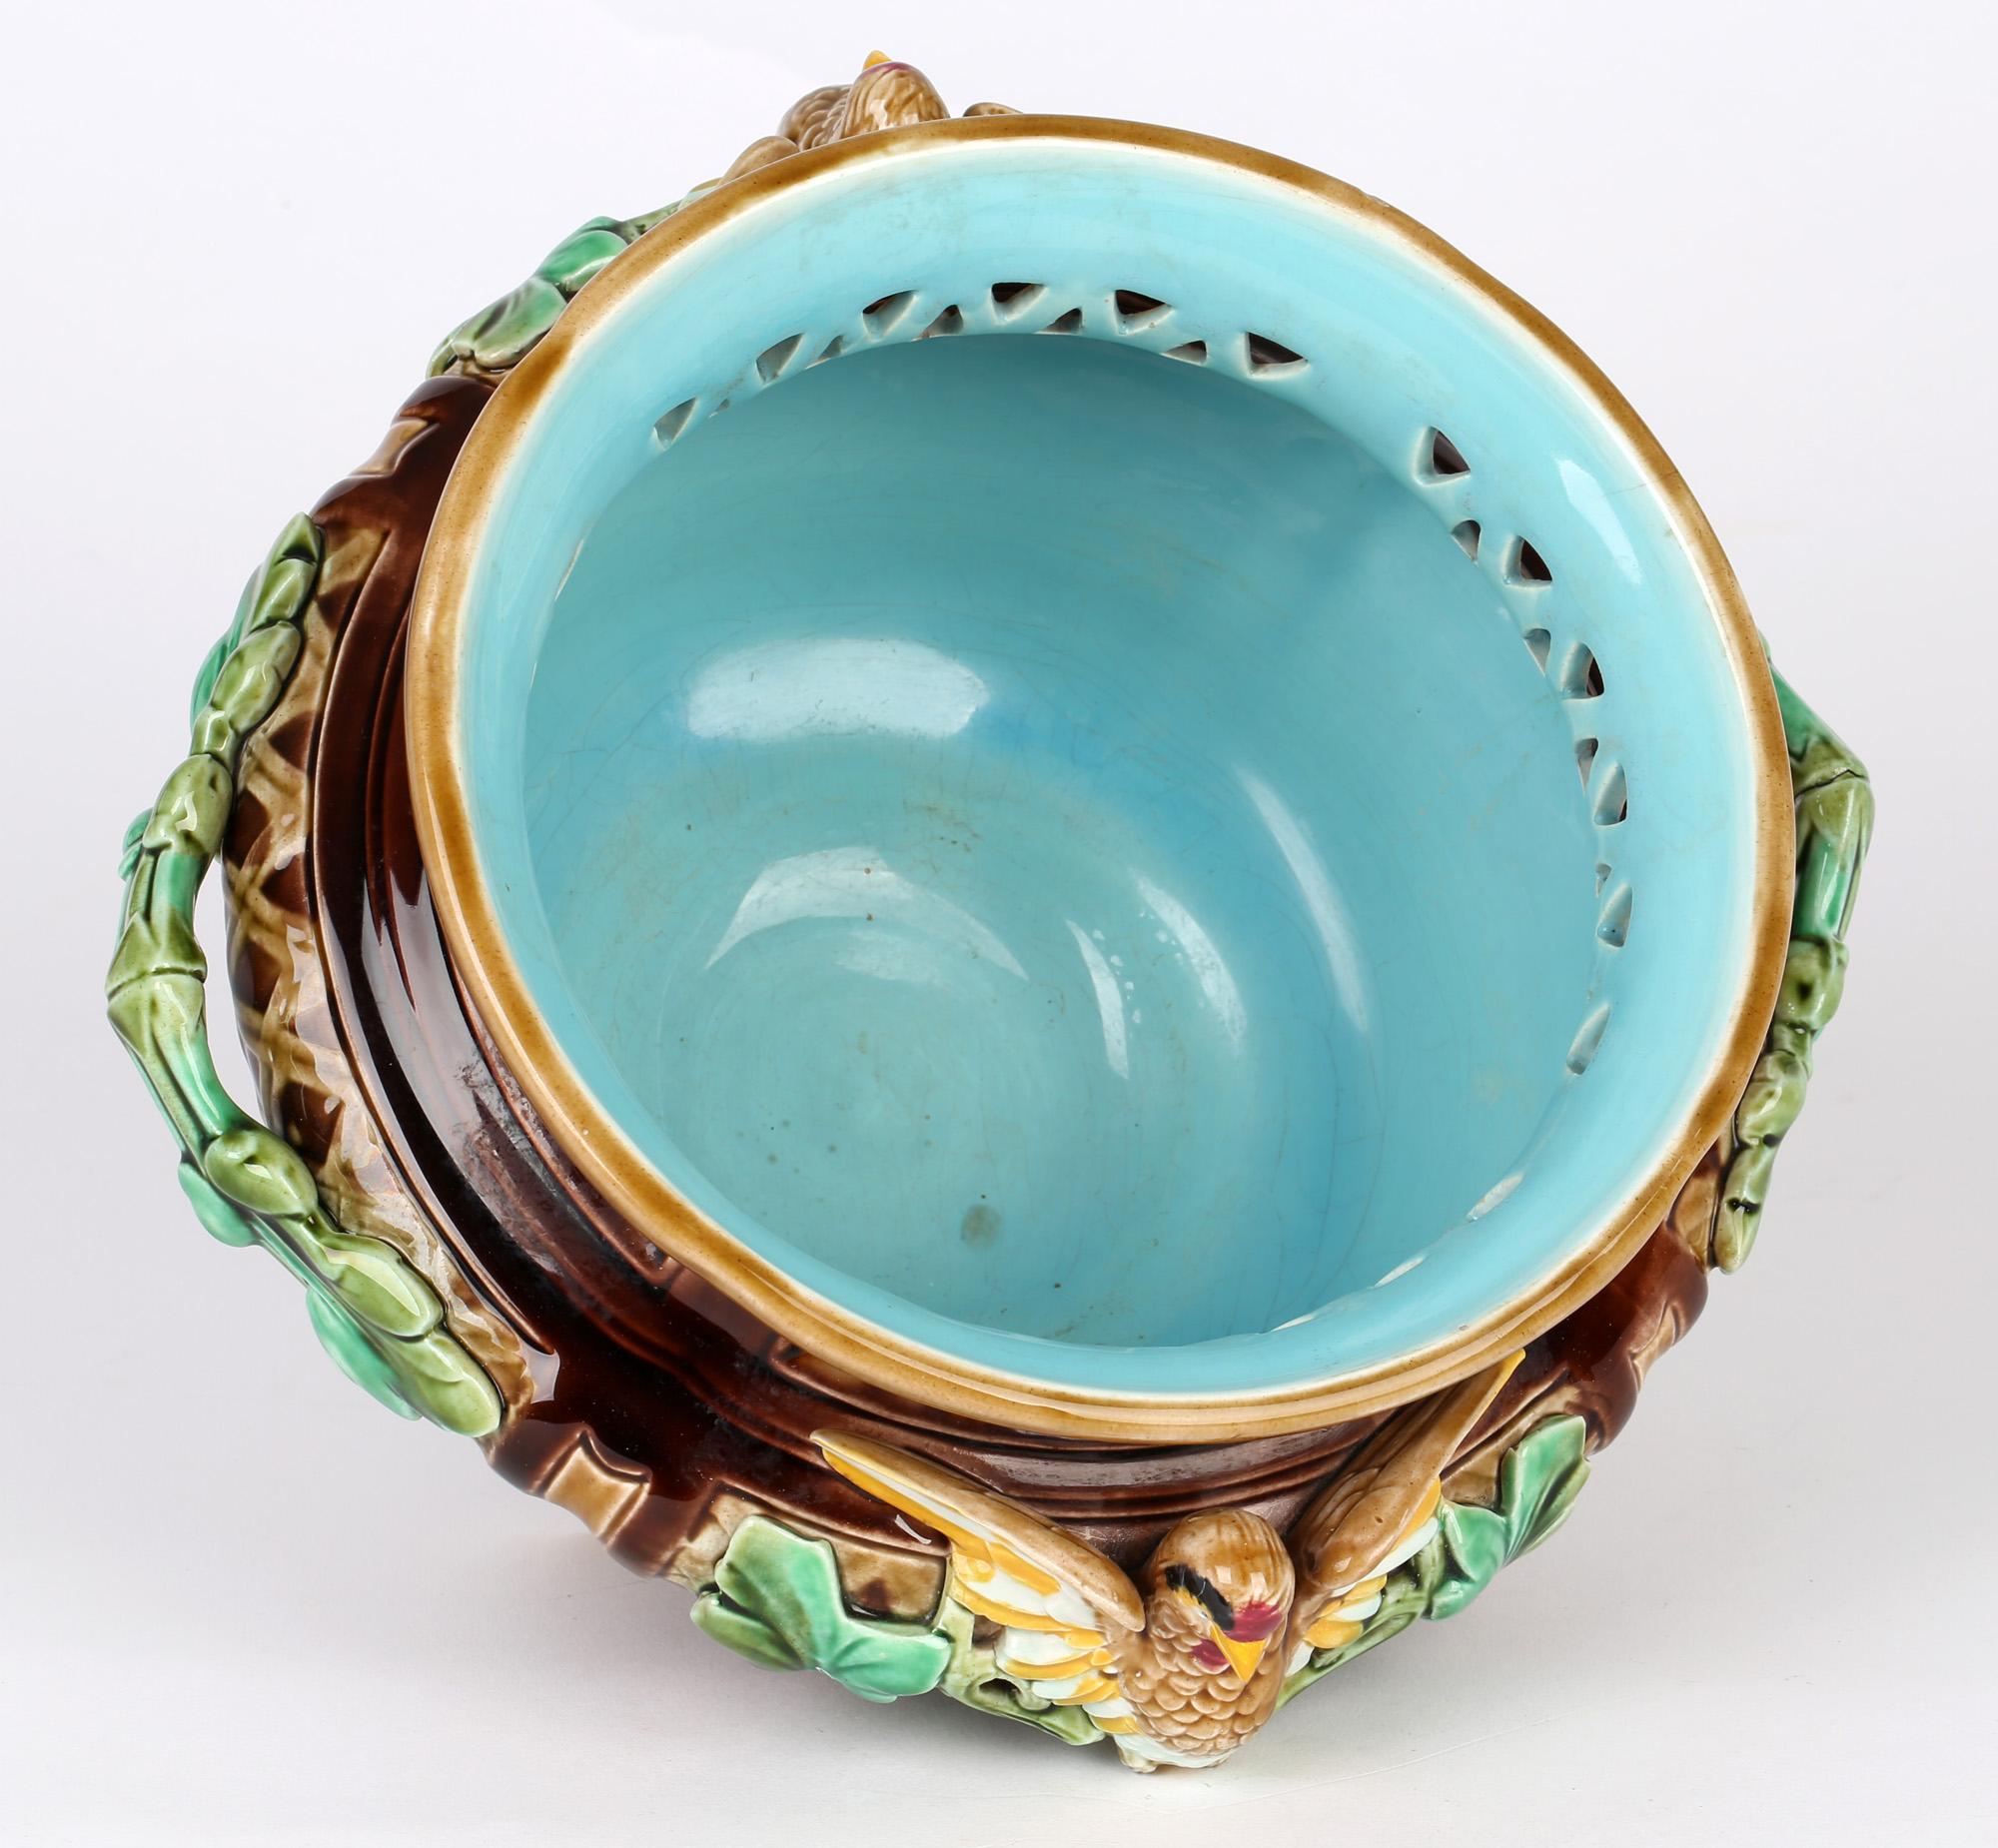 A rare and stunning French majolica twin handled pottery bowl applied with birds by renowned maker Sarreguemines and dating from the latter 19th century. The rounded bowl stands raised on four half ball shaped feet with a basket weave styled design.